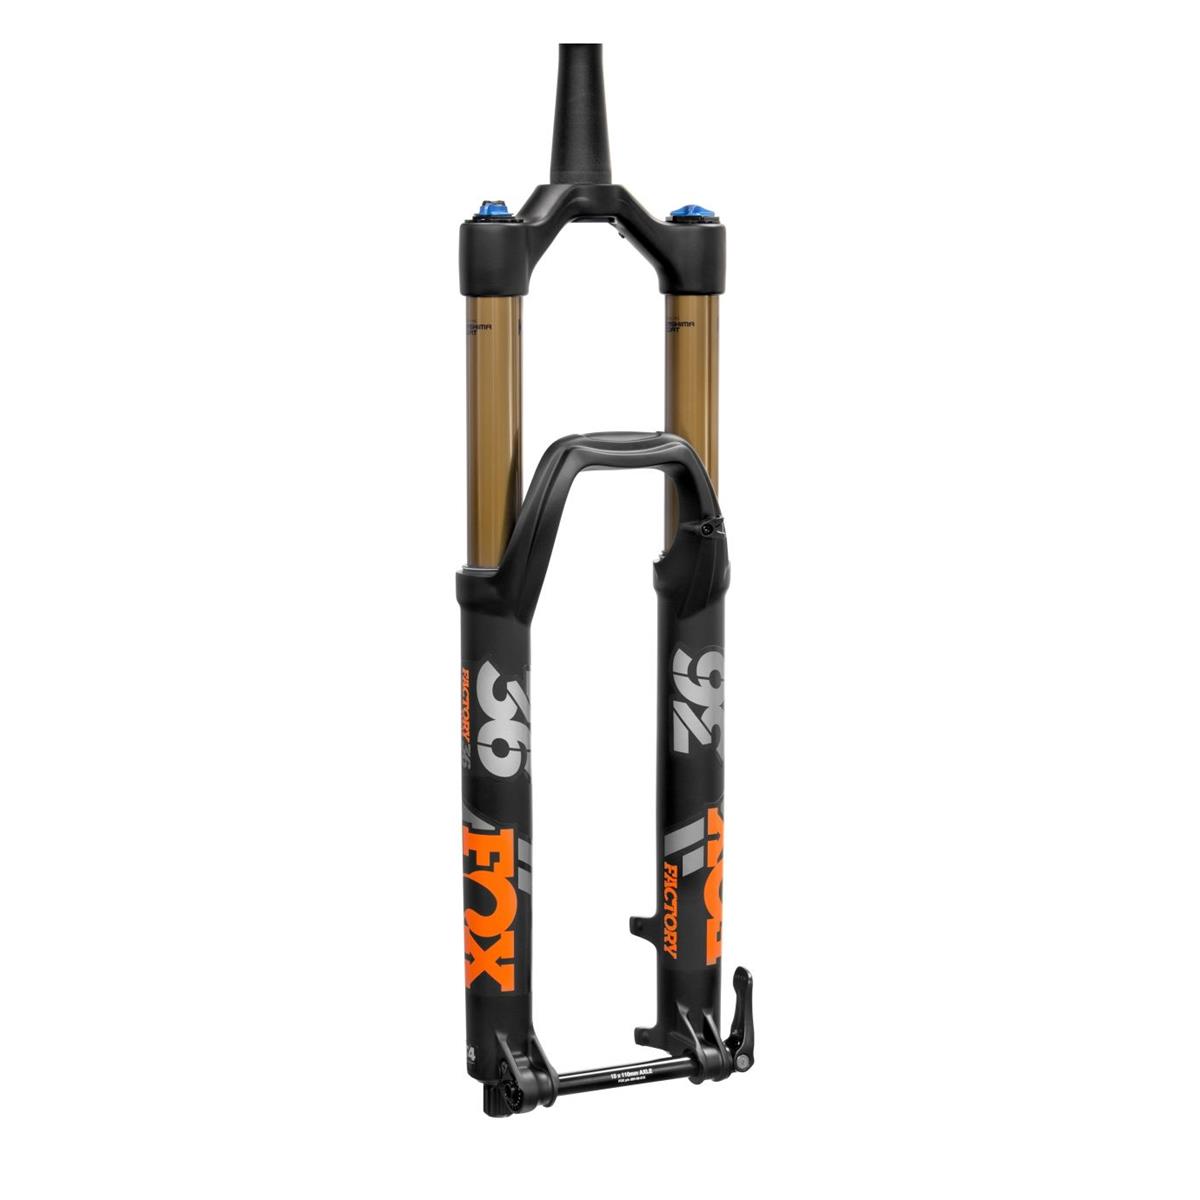 Fox Racing Shox Forcella 36 Float Factory Black, 2019, 27,5 Inch, 15x110 mm, GRIP2, 37 mm Offset